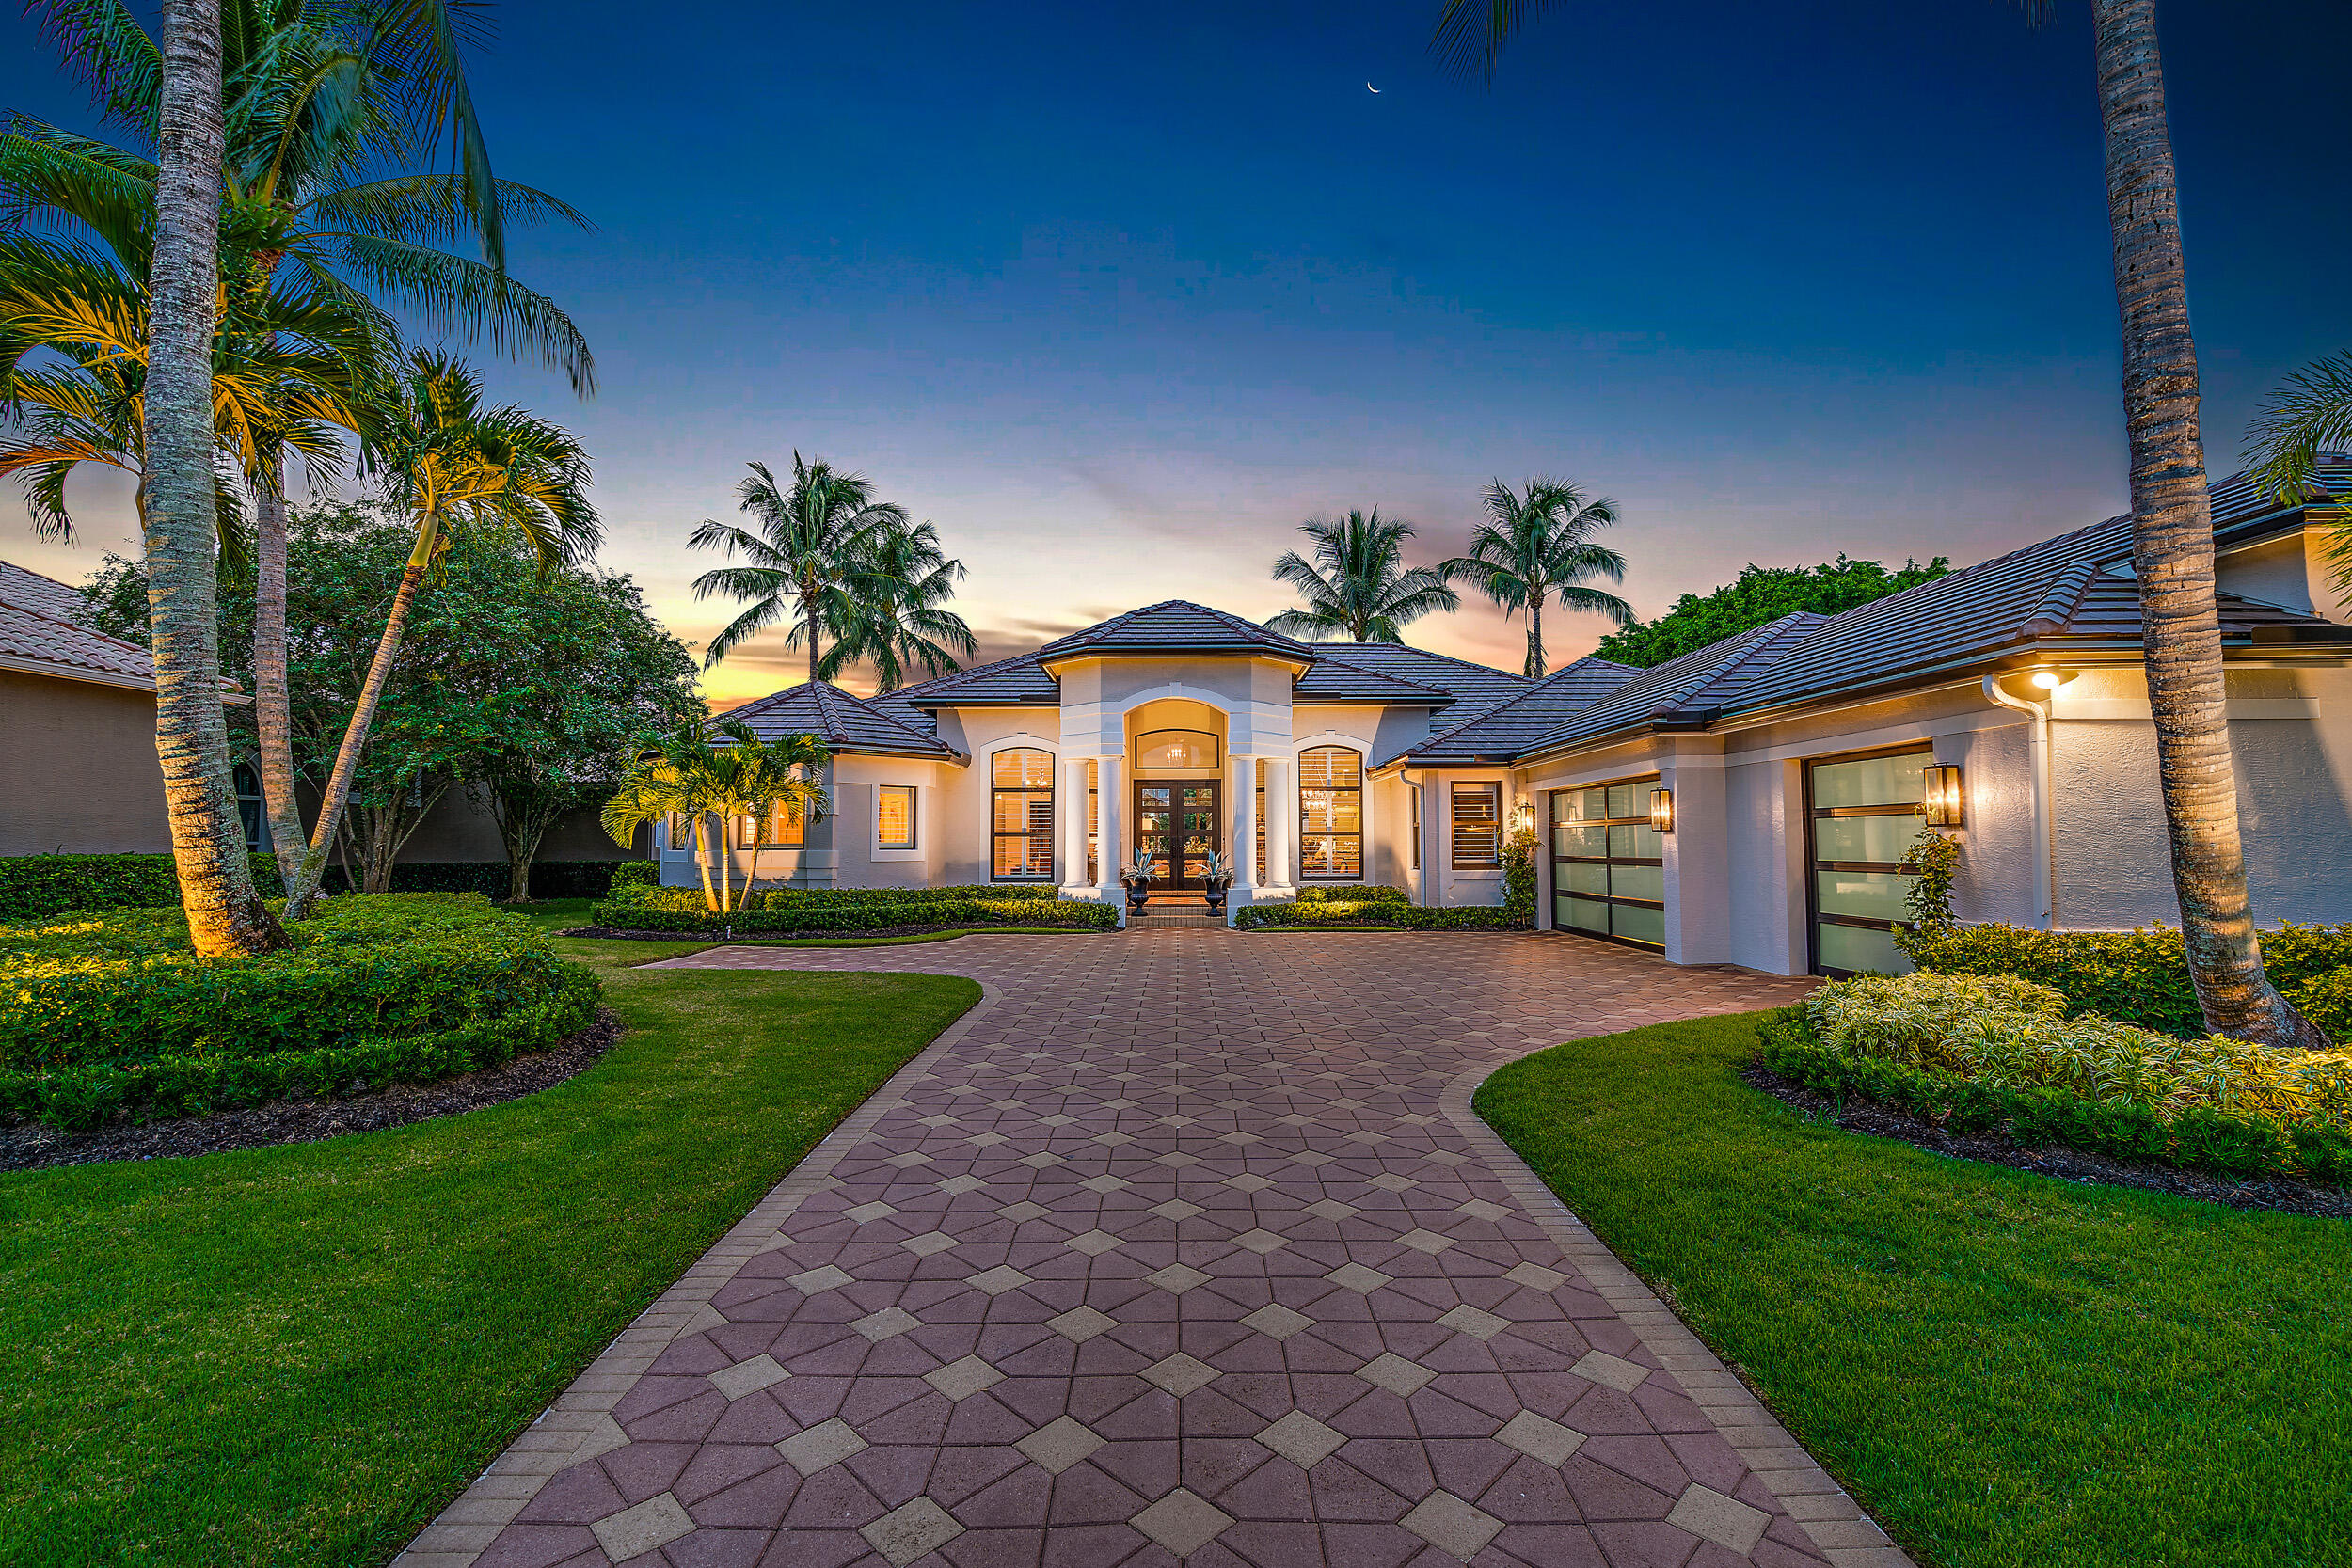 Spectacularly renovated inside and out, designer-done, and located on a unique lot on Ibis's 'Street of Dreams,' this re-imagined estate is one of the closest estate homes in Ibis to the Club. Simply walk, bike, or take a quick golf cart ride to the Club through a cart-path short-cut, designed for the exclusive usage of residents of this area. Sleek and modern, yet warm and inviting, this 2022-renovated home boasts a NEW ROOF + NEW GUTTERS, NEW IMPACT GLASS throughout, NEW designer Impact Glass + Mahogany FRONT DOORS, and NEW Impact Glass and steel GARAGE DOORS --all done in 2022. The landscaping has been thoughtfully redesigned in a stately and manicured way that provides magnificent curb appeal, and works cohesively with the contemporized exterior.